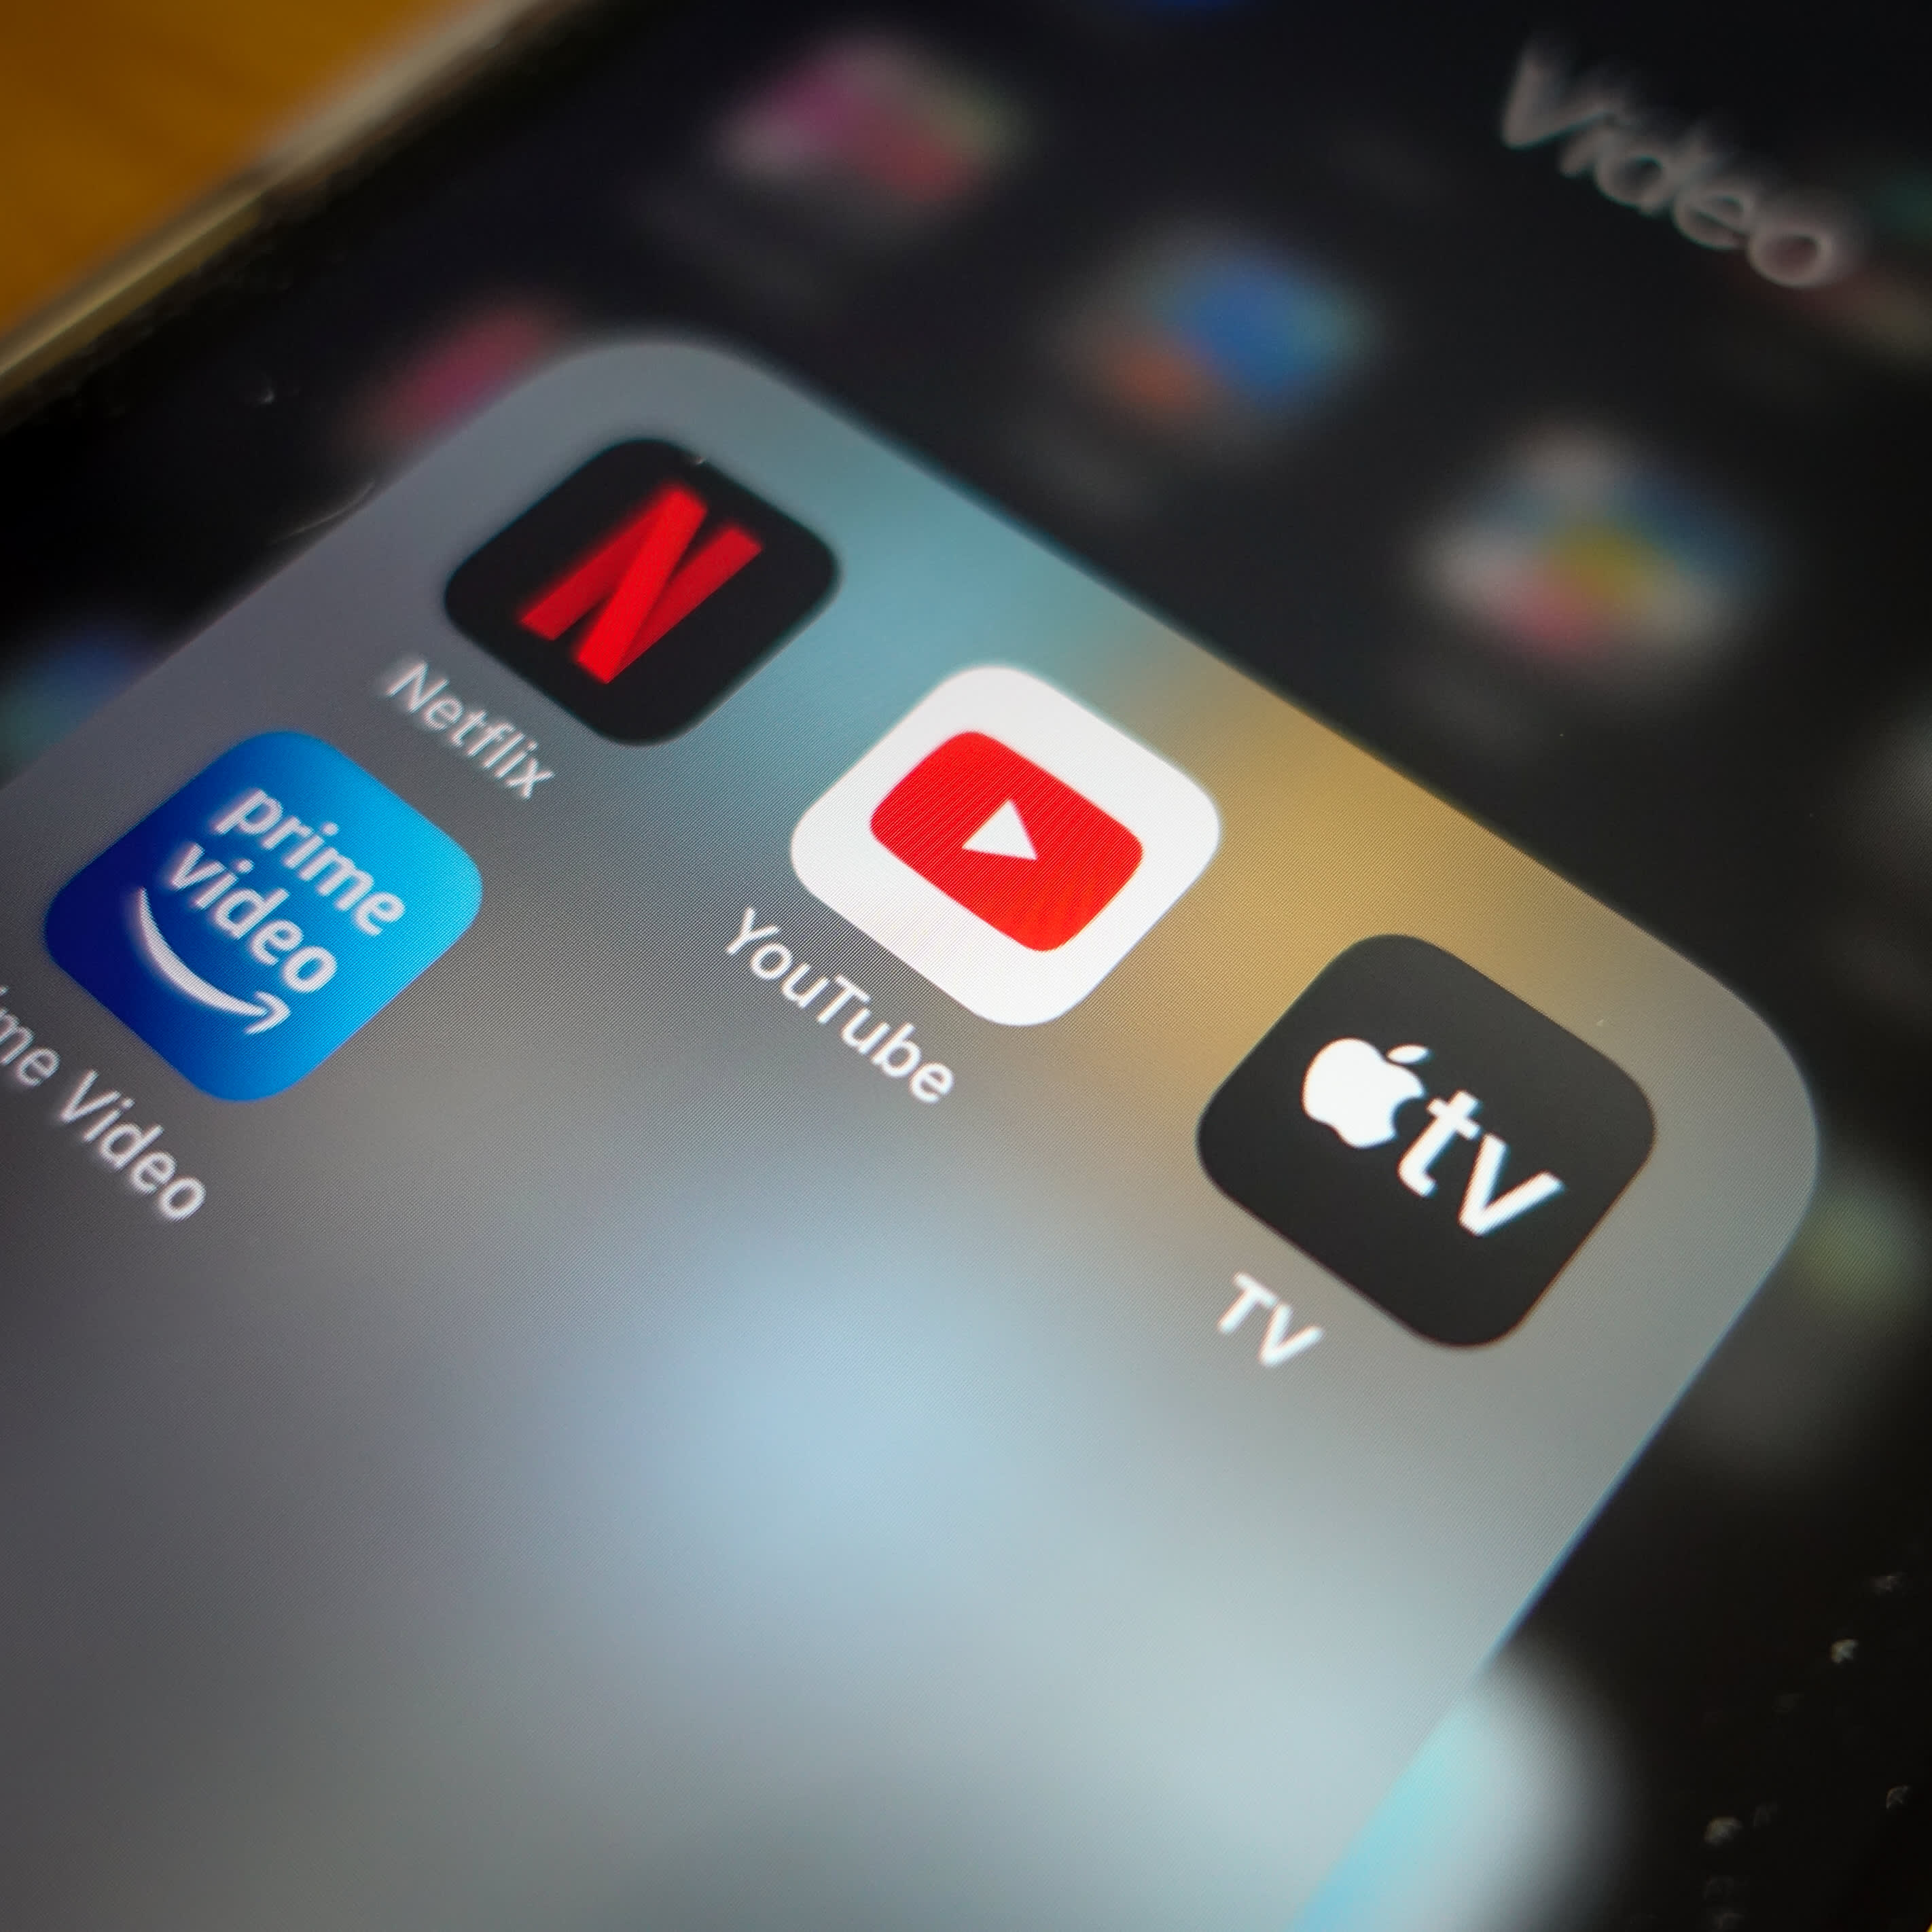 YouTube reaches 120 million people watching TV screens per month